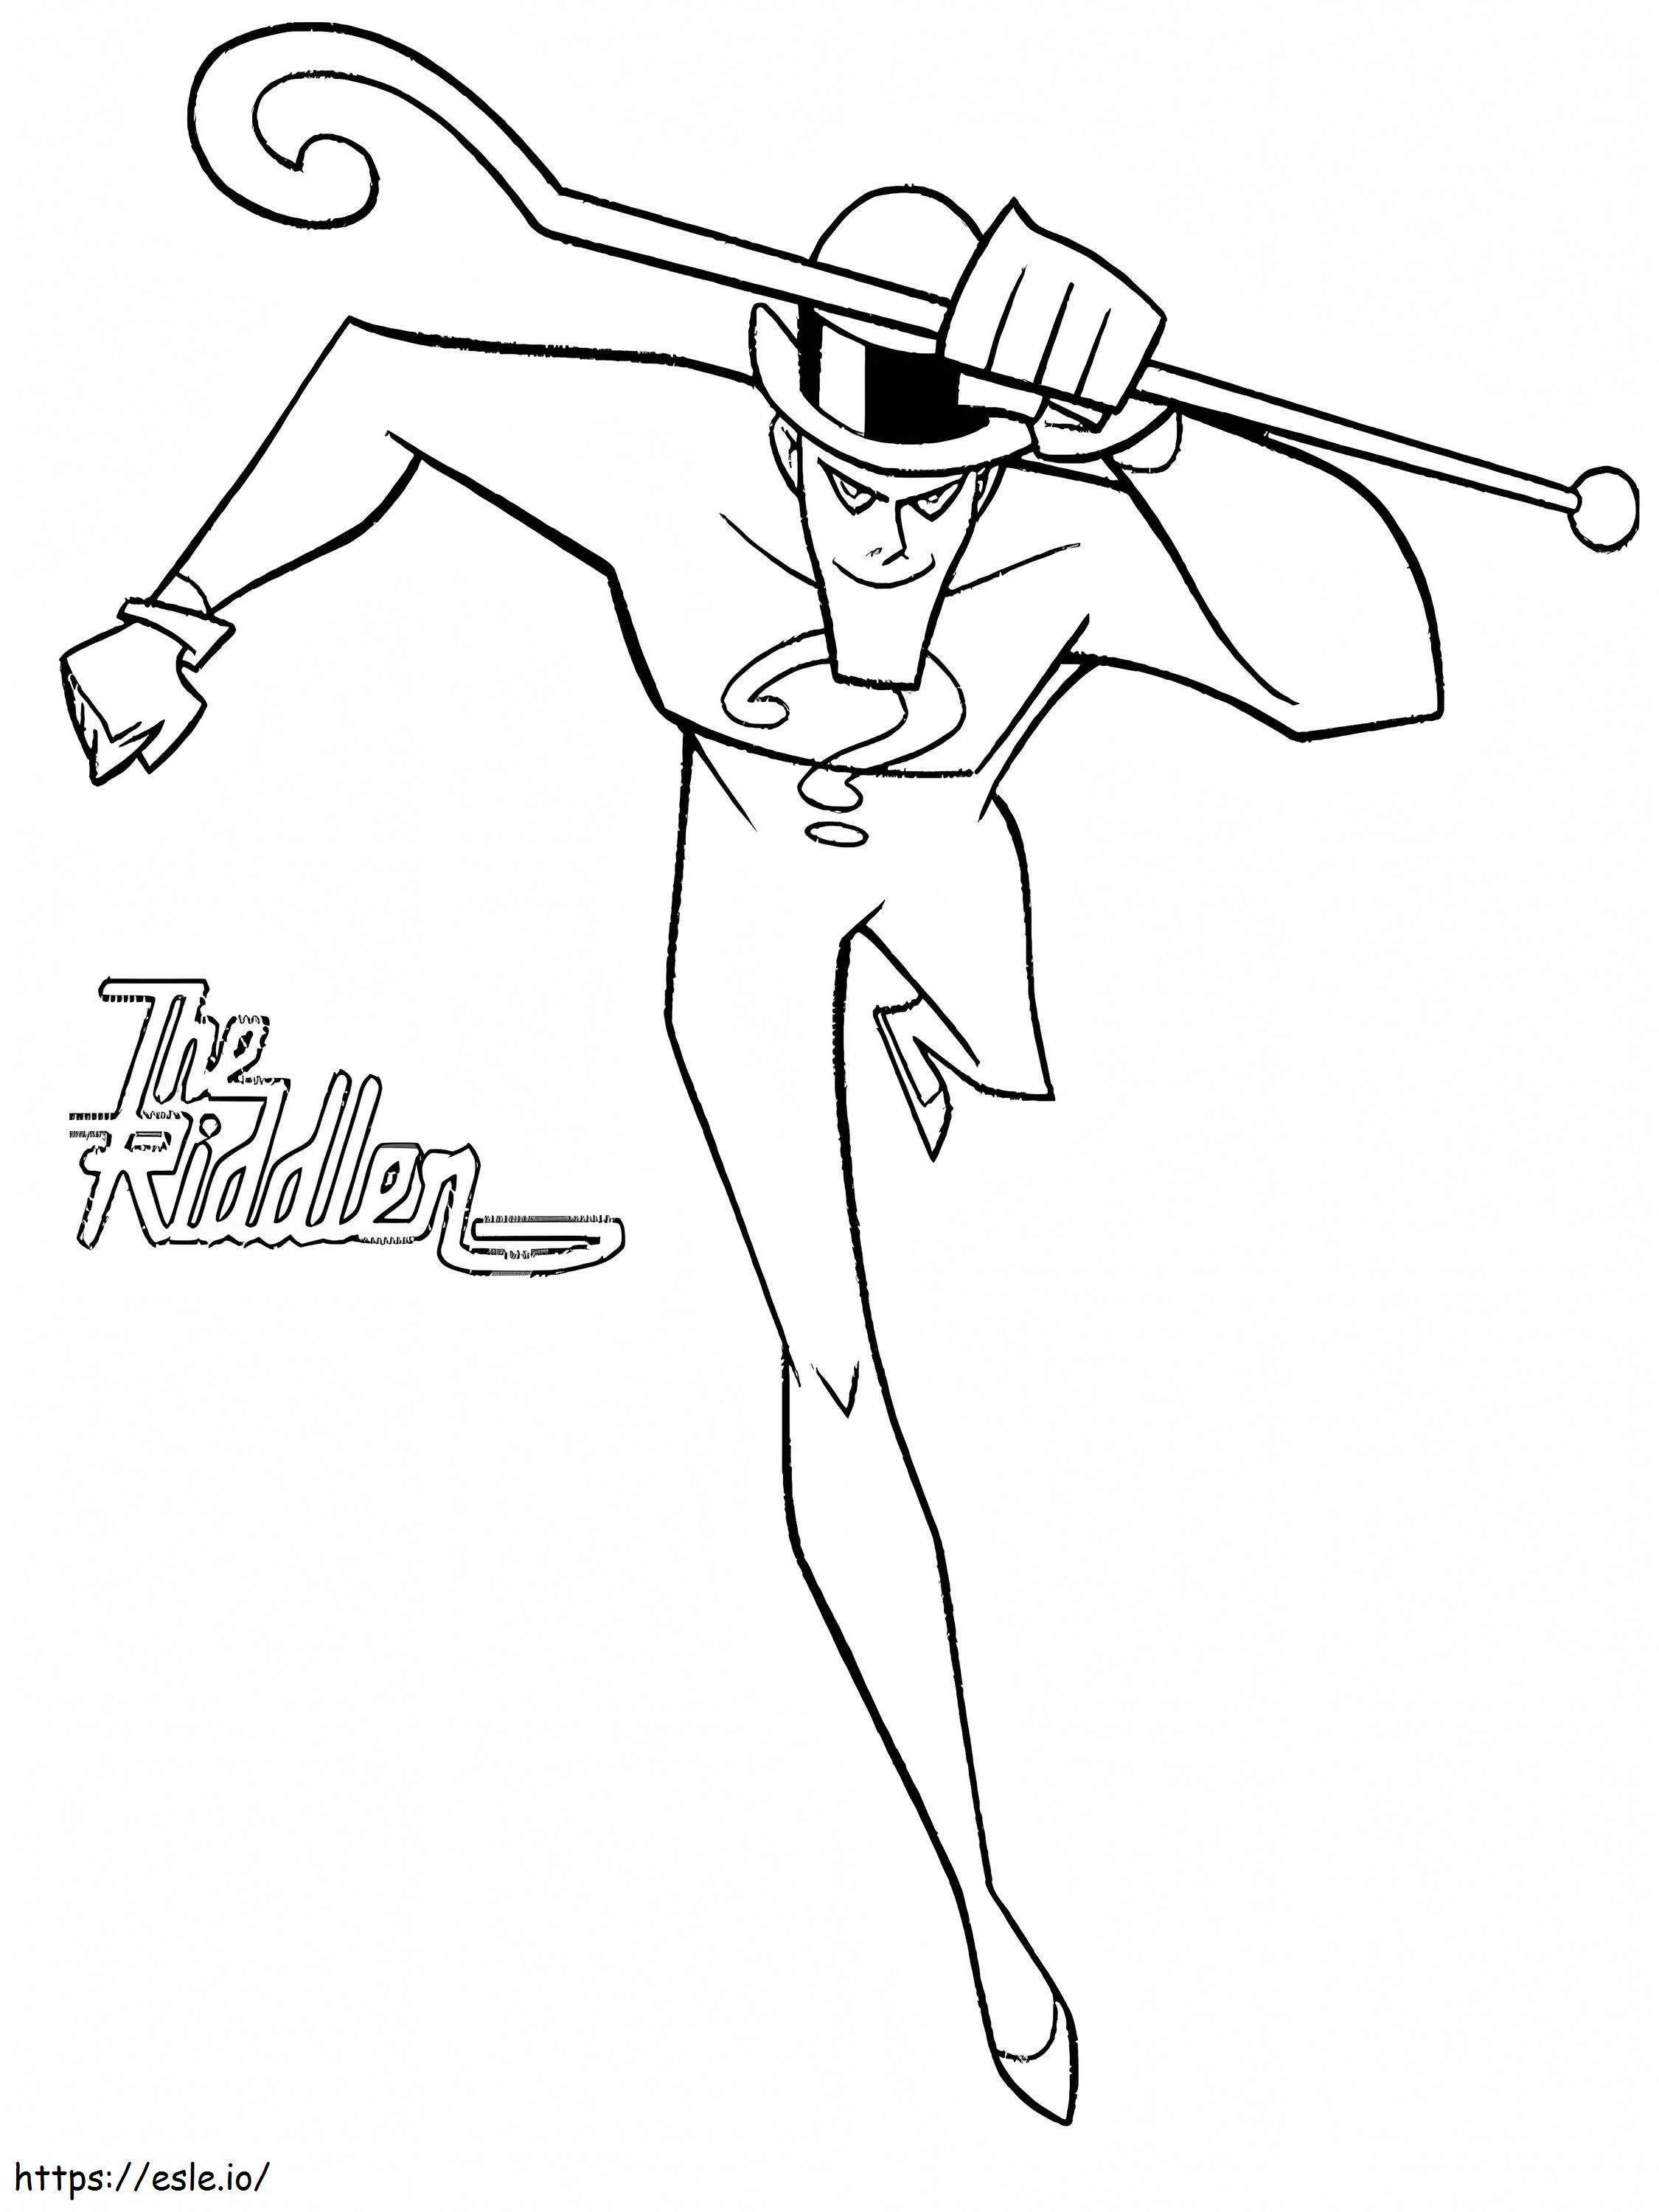 The Riddle coloring page